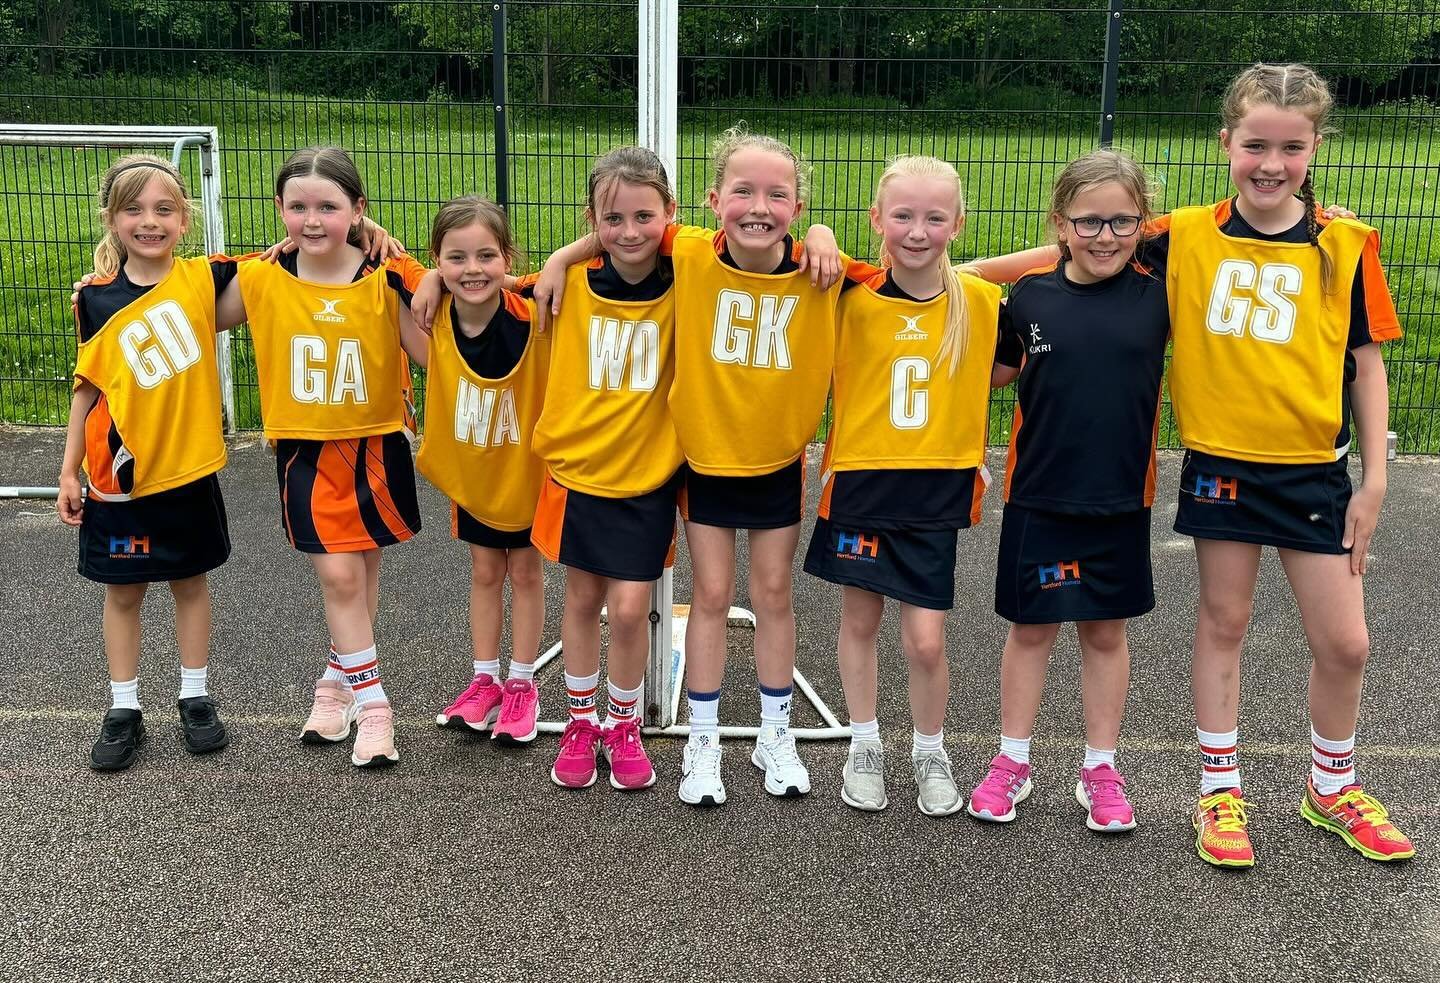 Another great performance showing off our potential 👌🏻
8-1 to an U9 Hatfield team.
We drew the 3rd quarter 1-1 and the last 0-0 💪🏻
POM was voted as Erin 👏🏻 #blueandorangefamily🧡🐝💙